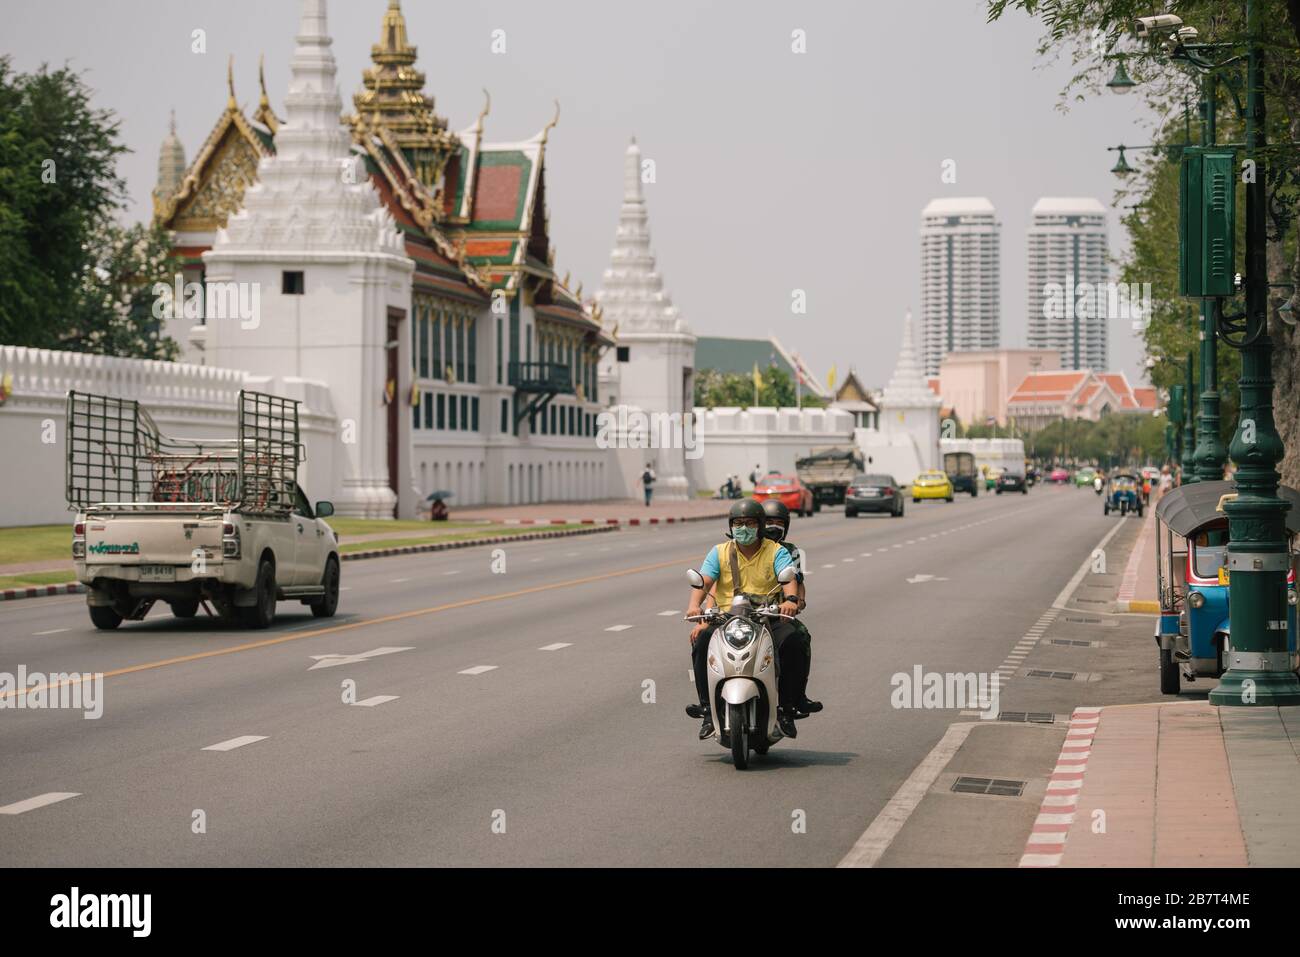 A motorbike passes the Grand Palace with the driver and passenger both wearing protective face masks Stock Photo